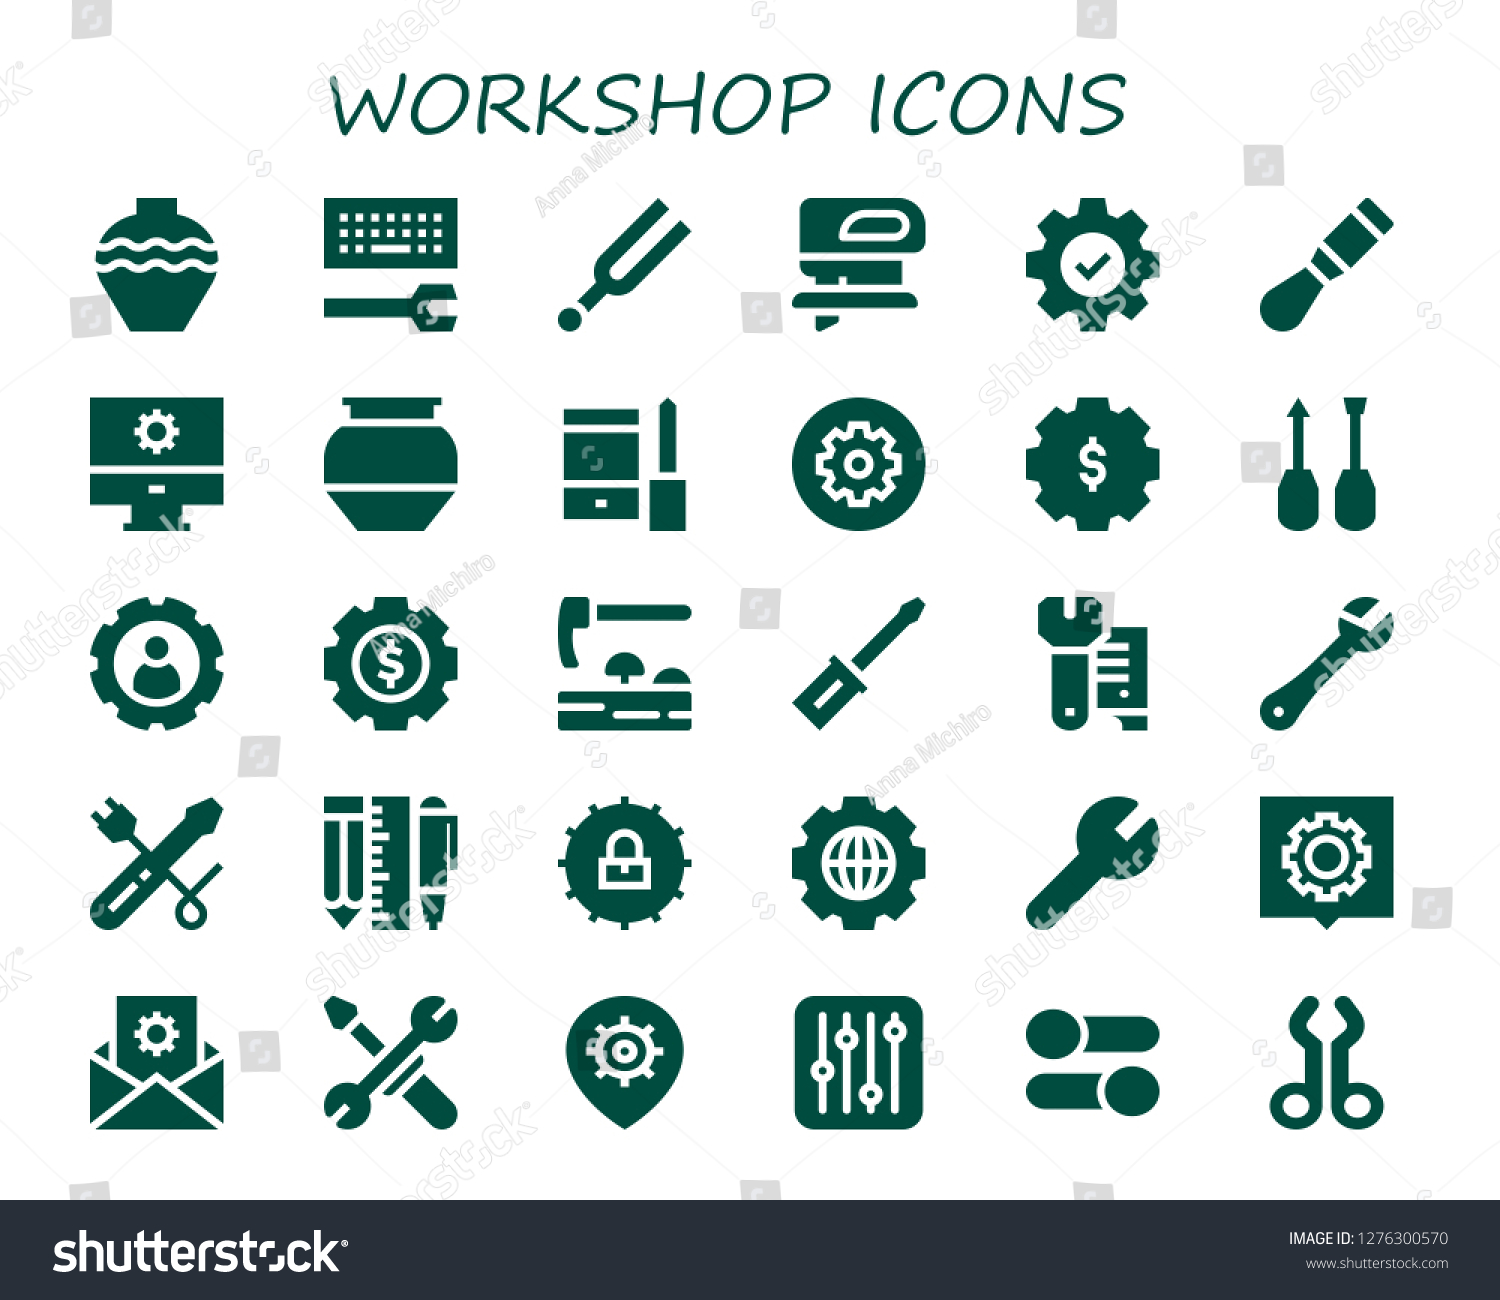 SVG of  workshop icon set. 30 filled workshop icons. Simple modern icons about  - Pottery, Configuration, Tuning, Fretsaw, Settings, Chisel, Screwdriver, Adze, Wrench, Tools, Tool svg